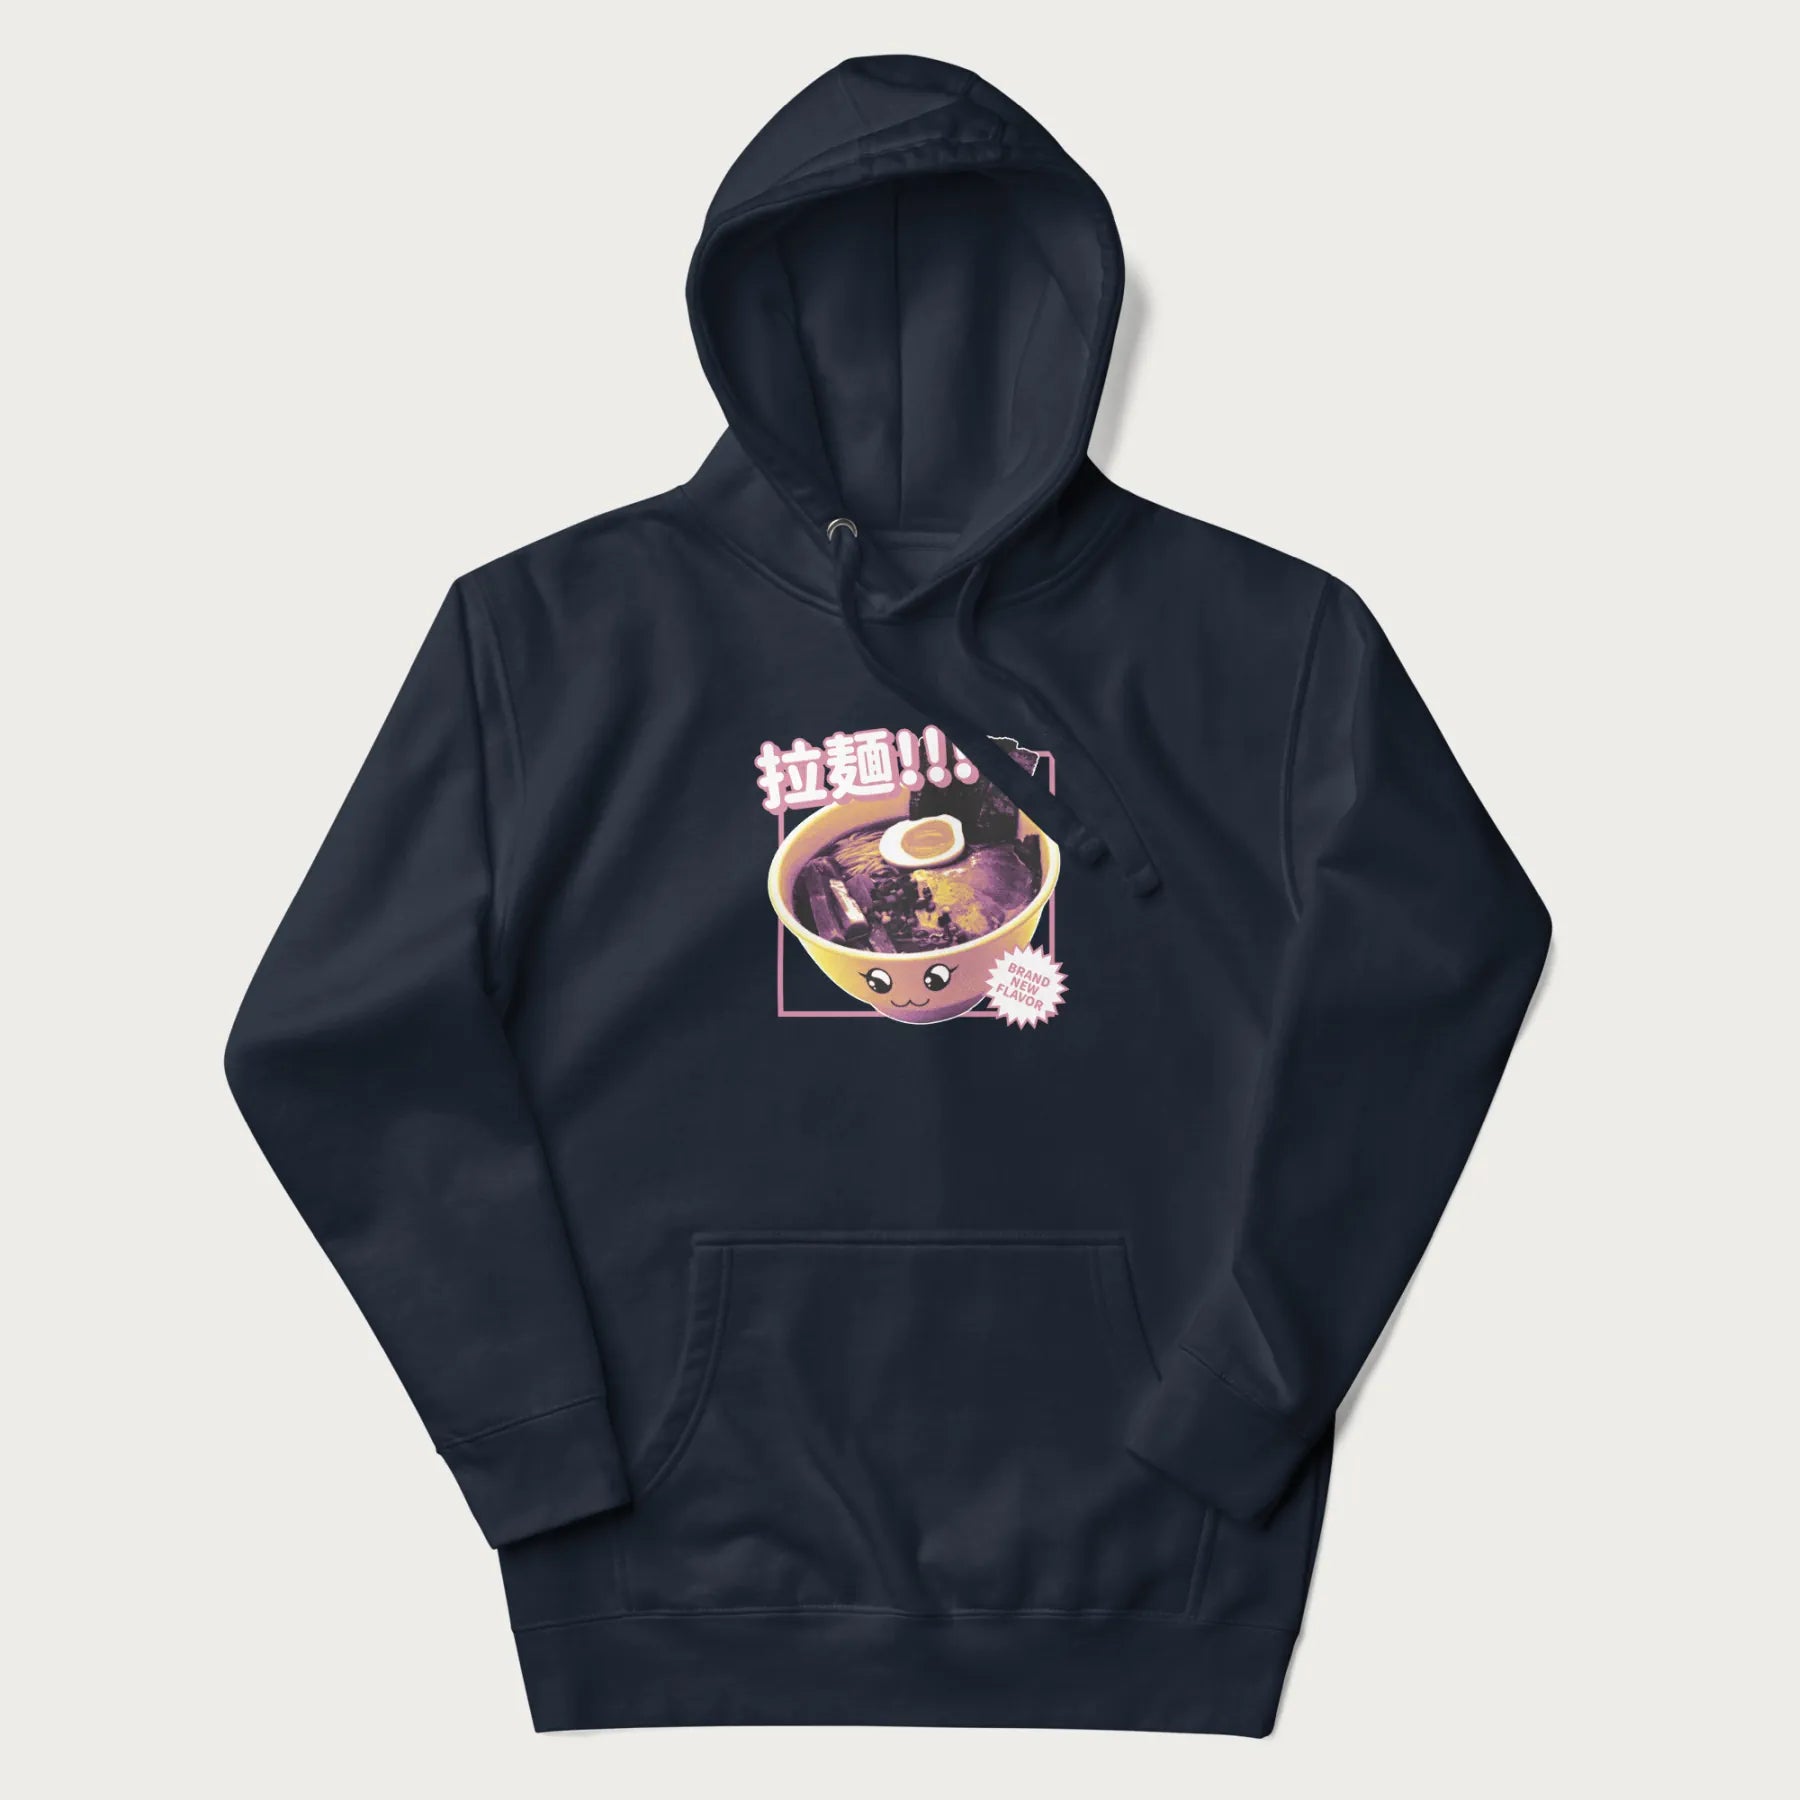 Navy blue hoodie with Japanese text '拉麵!!!' (Ramen!!!) in vibrant pink and realistic ramen bowl graphic.